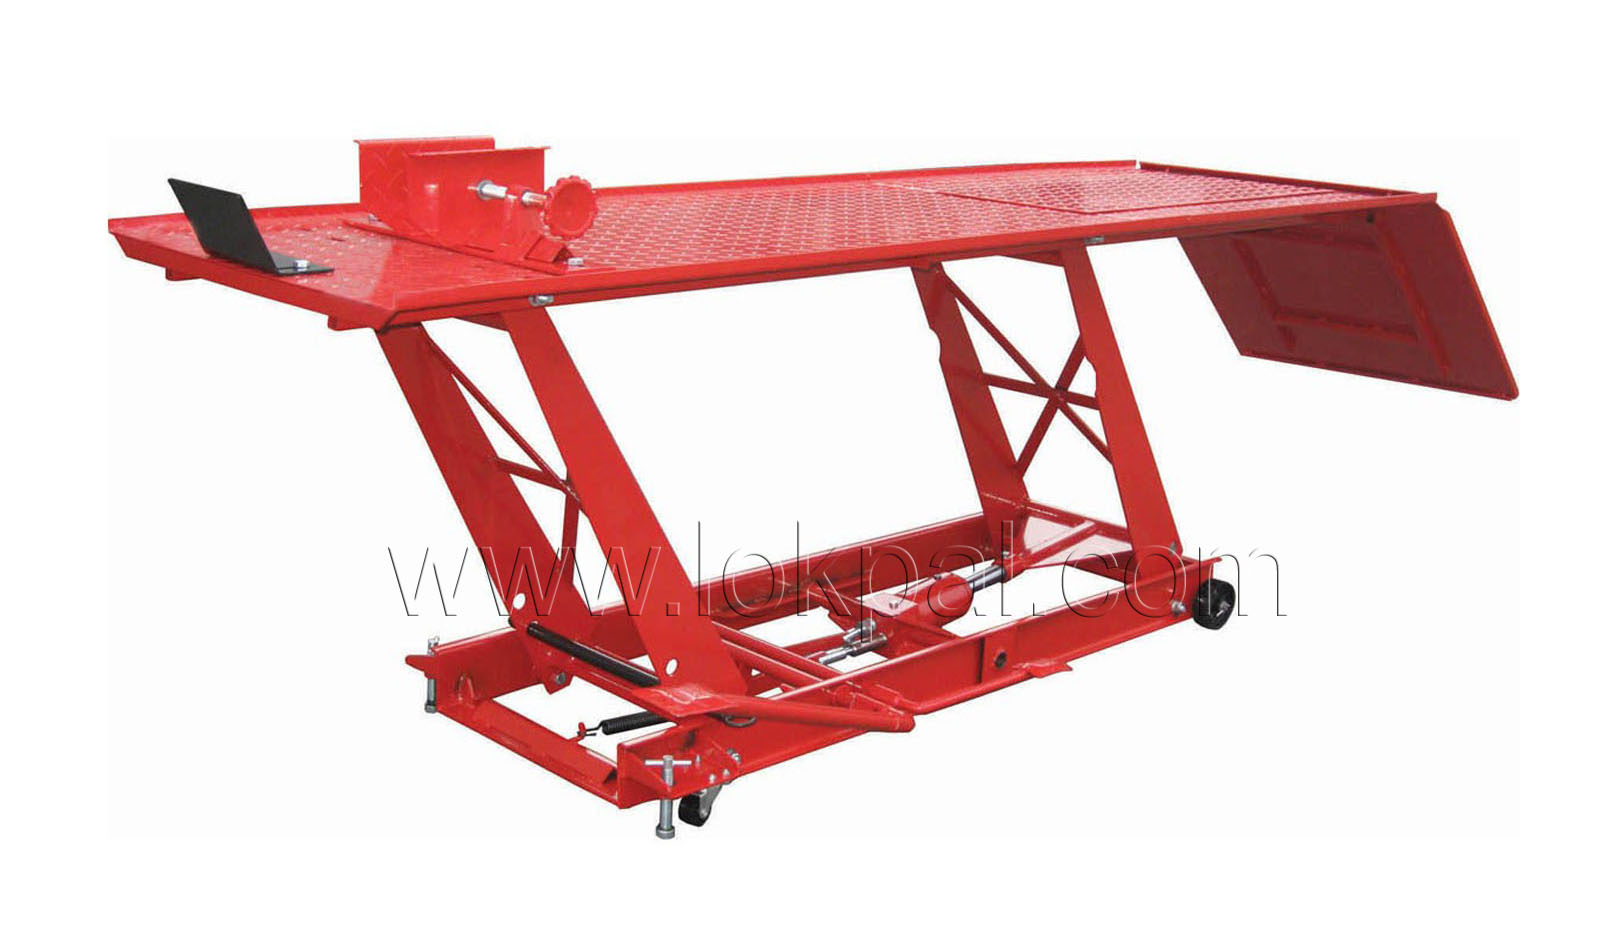 Motor Cycle Liftable, Motor Cycle Lift Table Manufacturer, Supplier, India